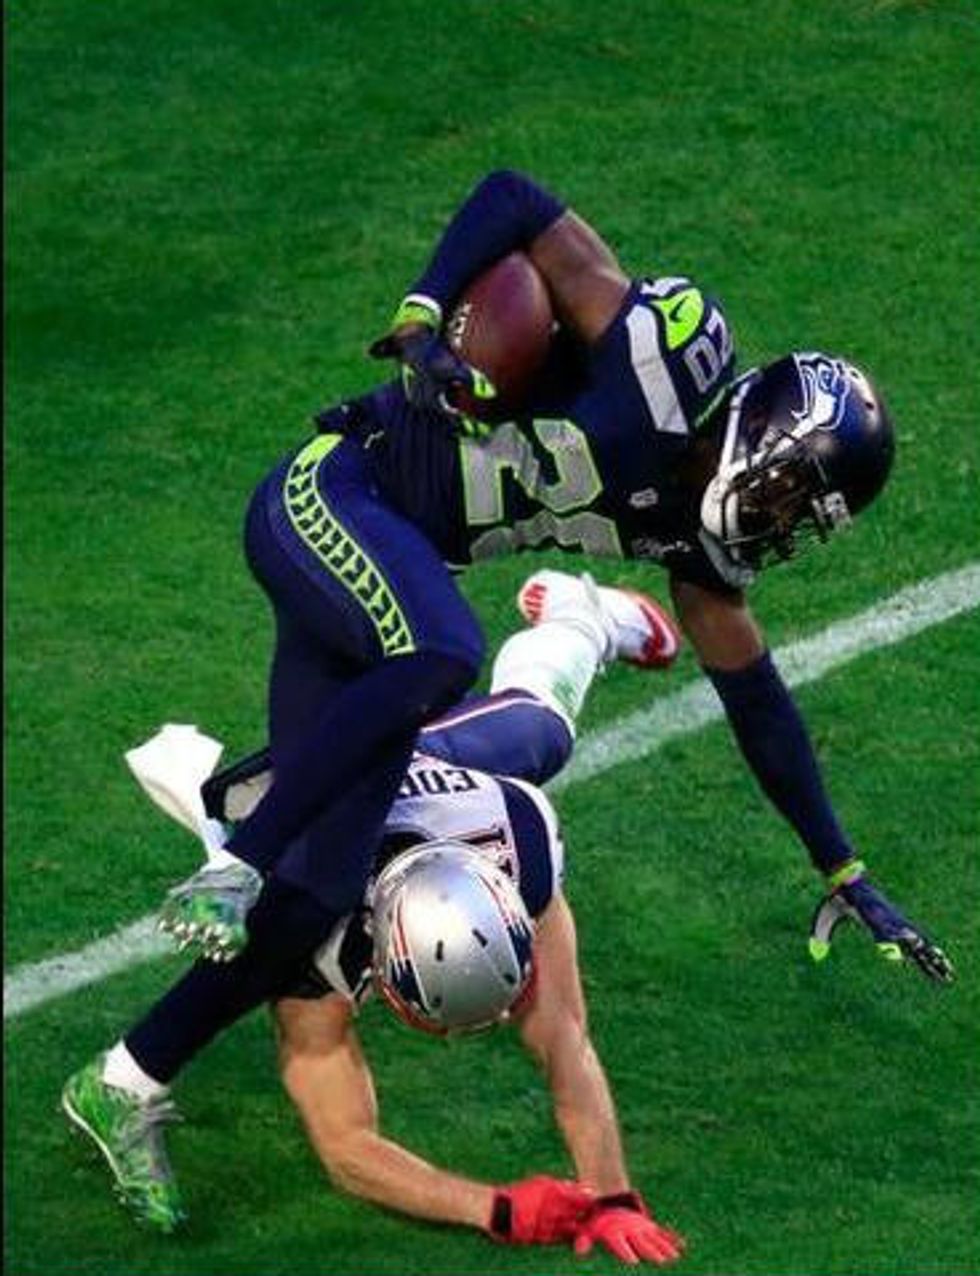 (GRAPHIC) The 'Grossest Super Bowl Injury' From Sunday's Game